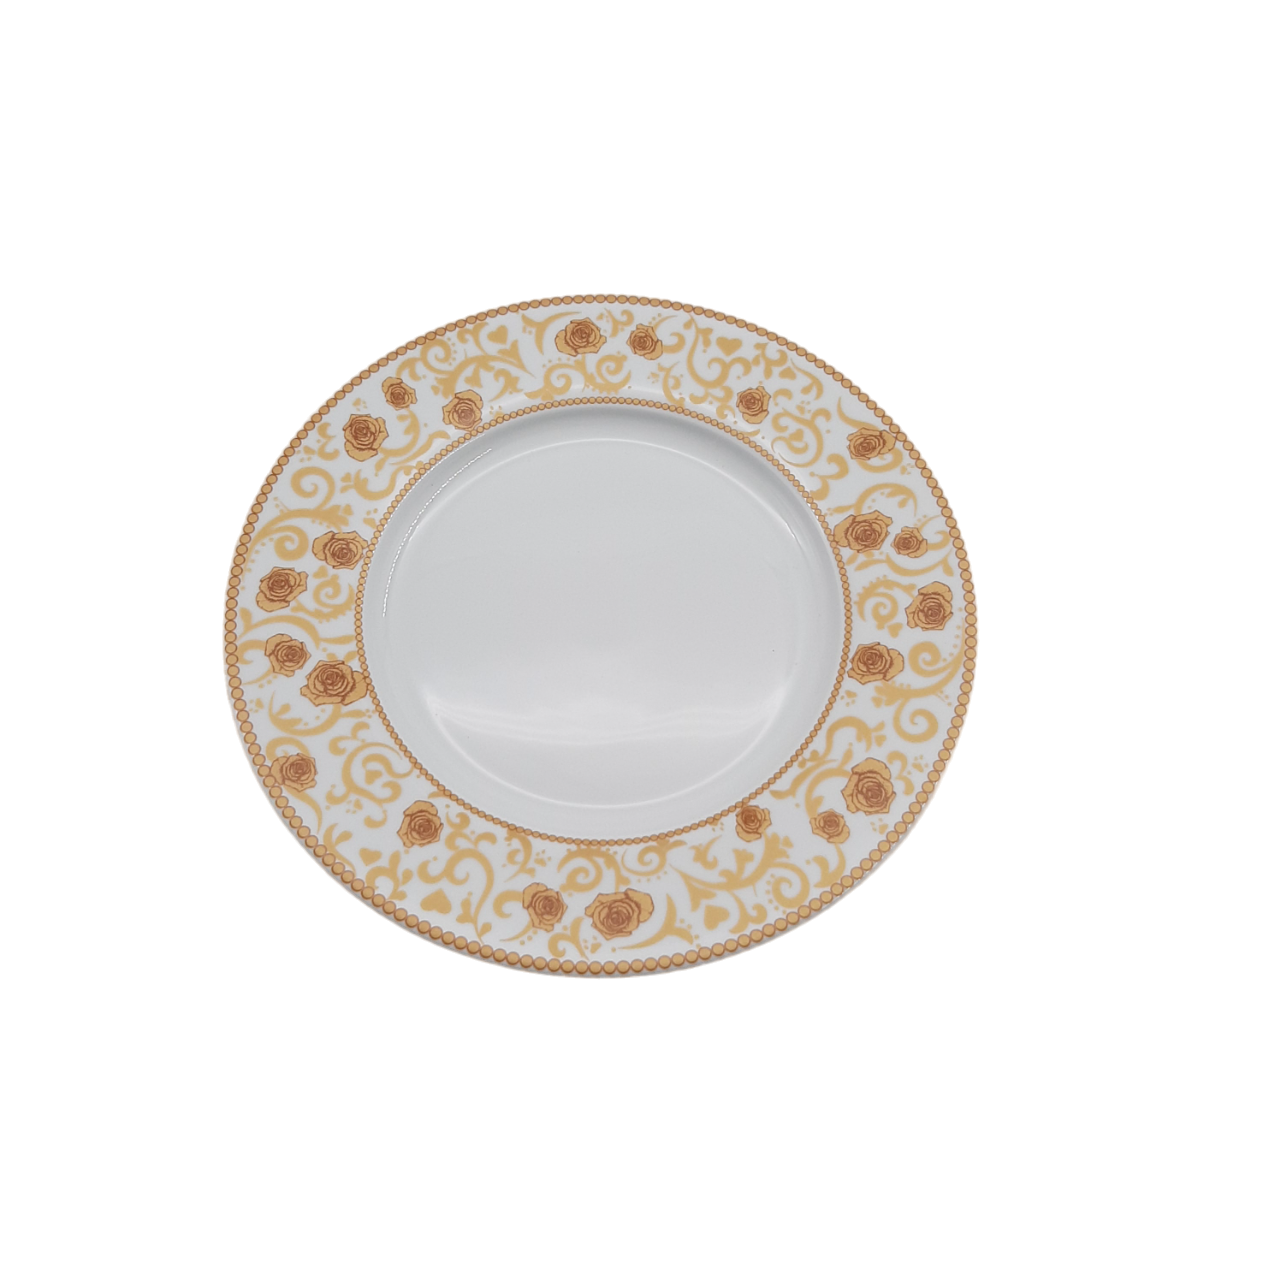 Jenna Clifford Mica Gold Side Plates - Set of 4